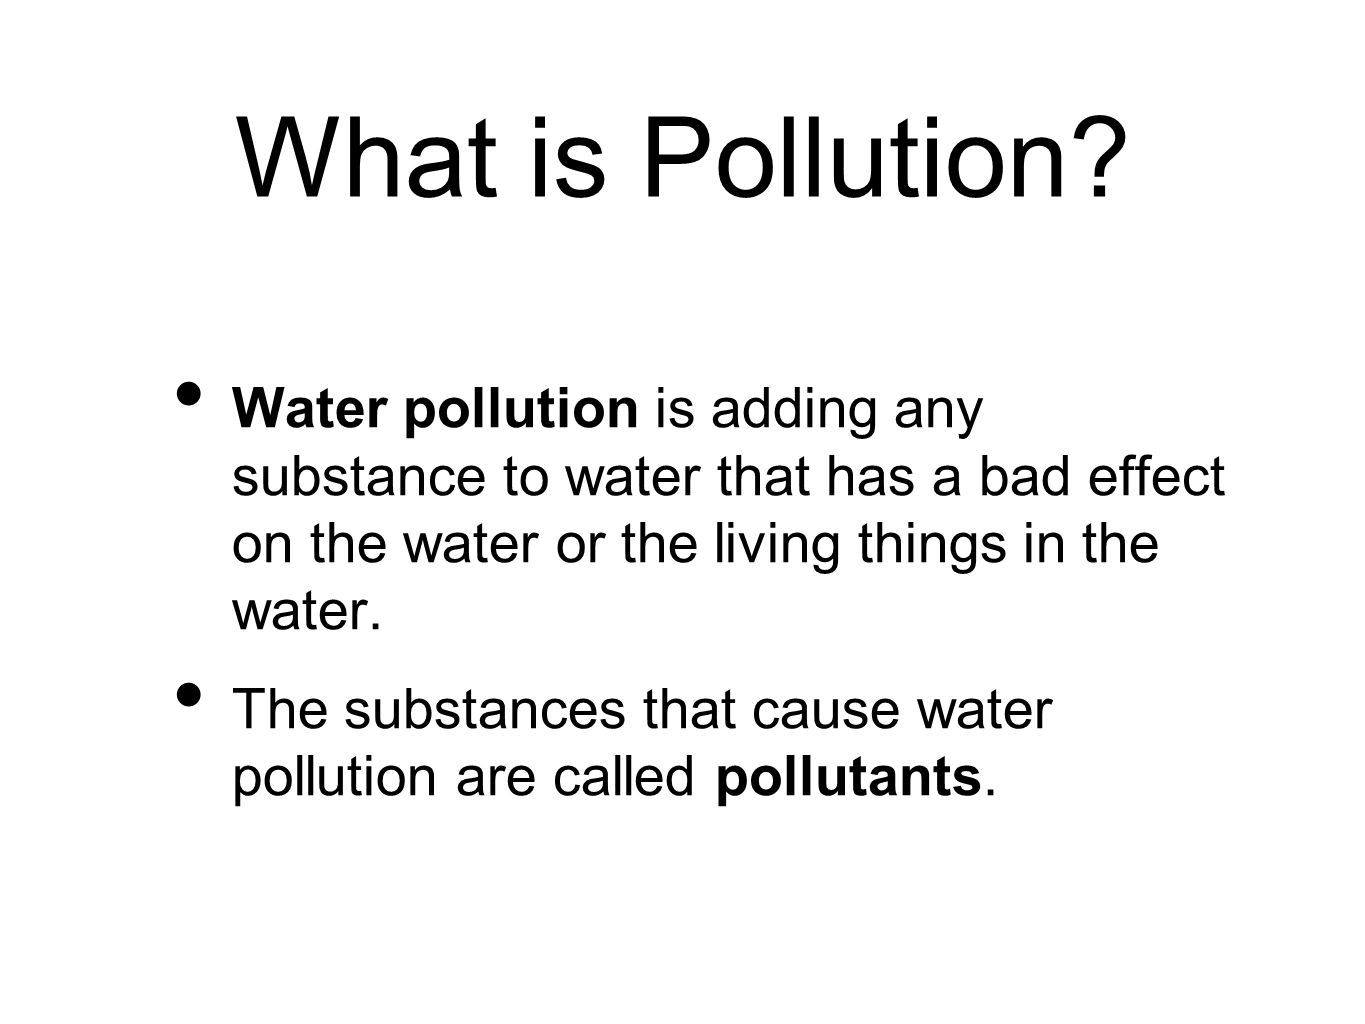 What is Pollution.